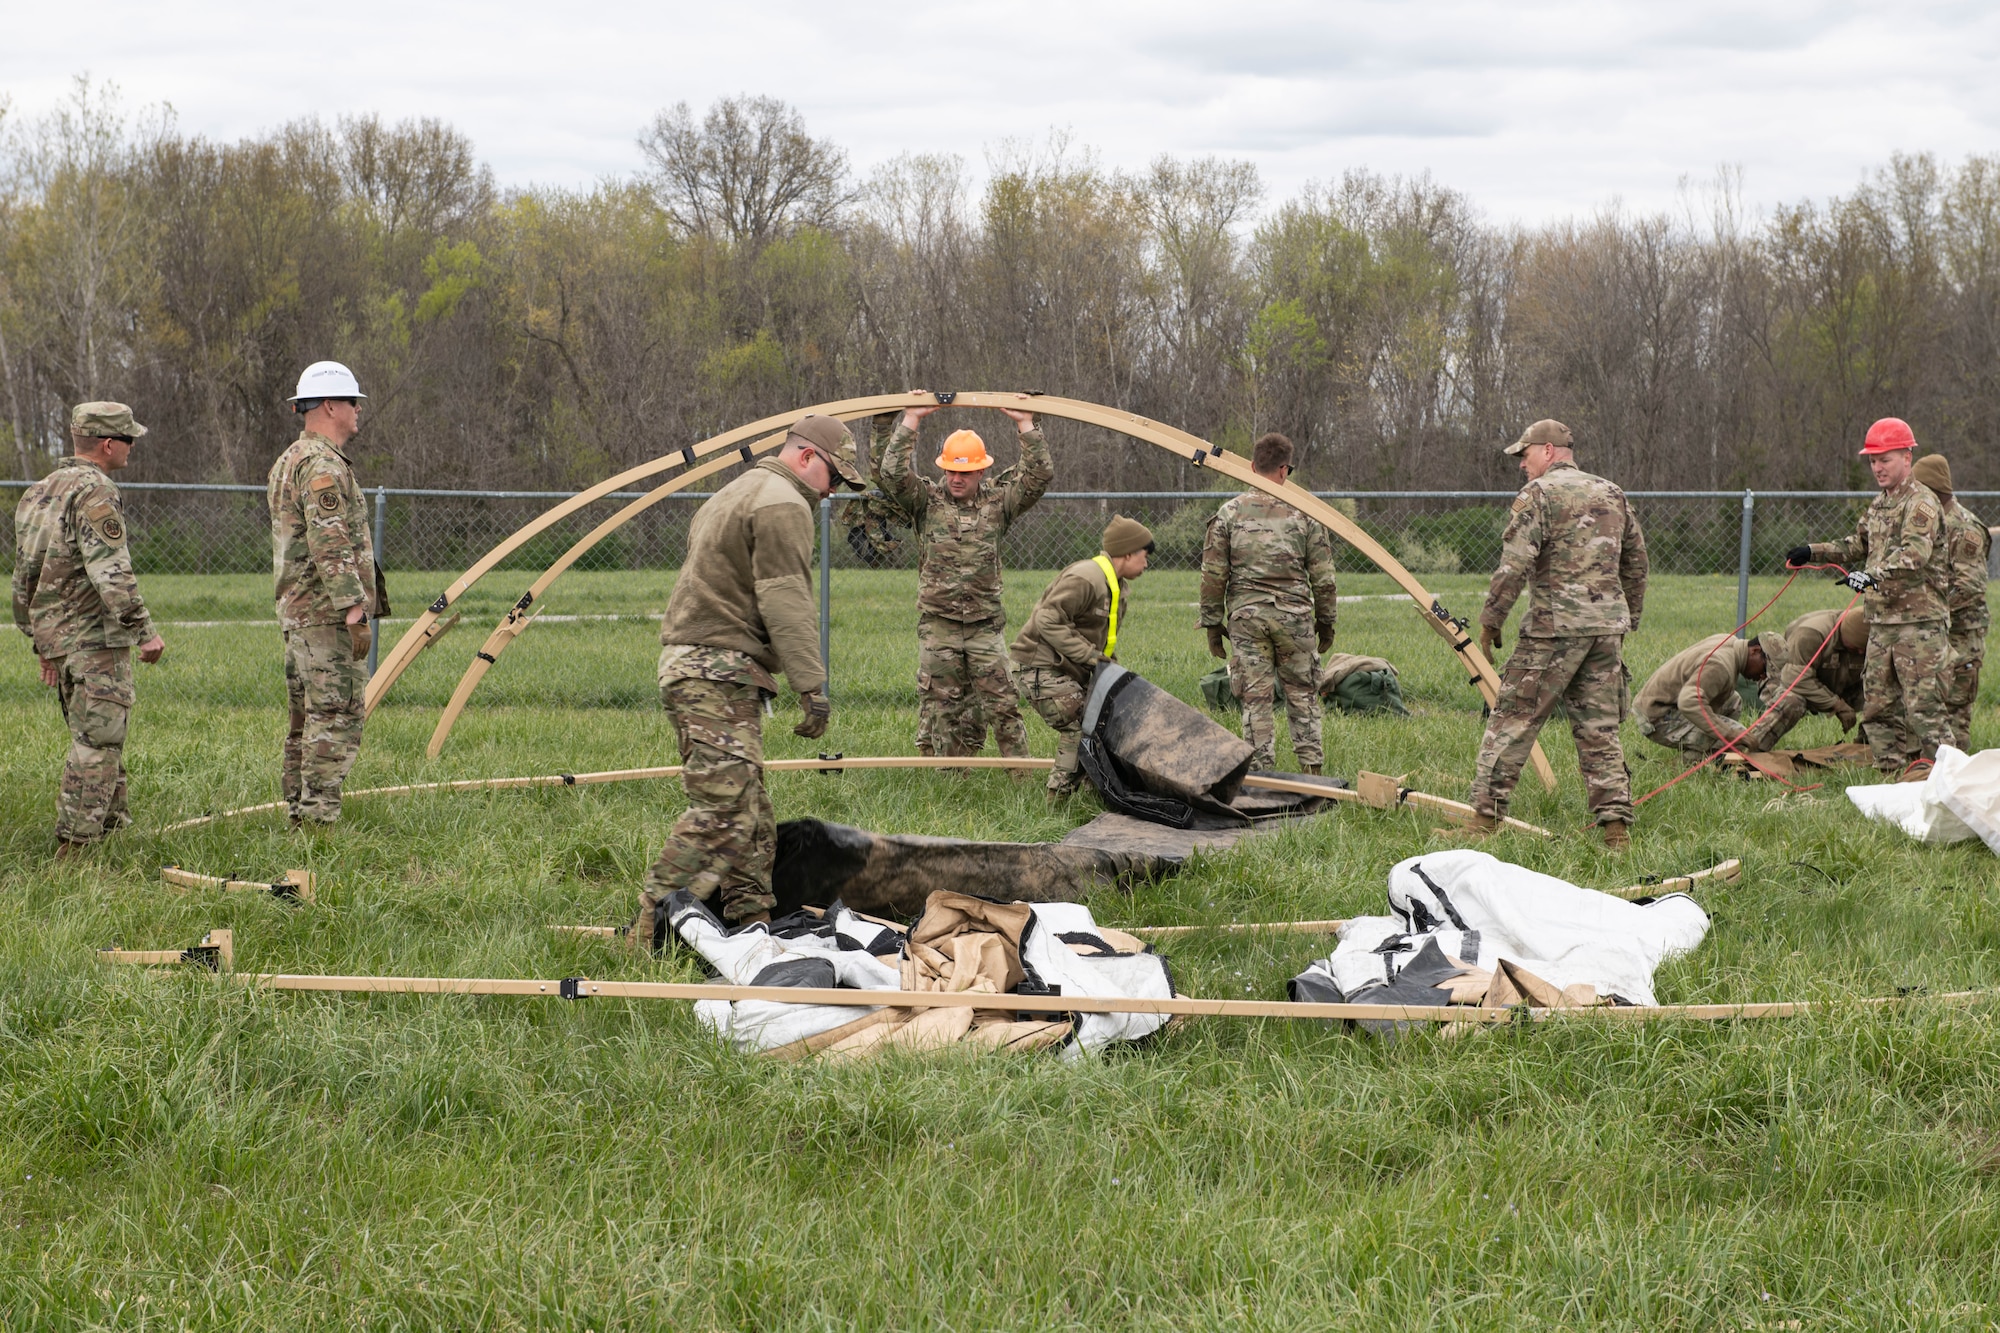 Citizen Airmen of the 932nd Airlift Wing exercise their wartime readiness skills during phase 2 of the Spartan Reserve exercise on April 5th, 2024 at Sparta Training Area, Illinois. The Spartan Phase II exercise aims to prepare airmen for complexities of modern warfare through recreating the challenges in a deployed environment. (U.S. Air Force photo by Staff Sgt. Brooke Spenner)